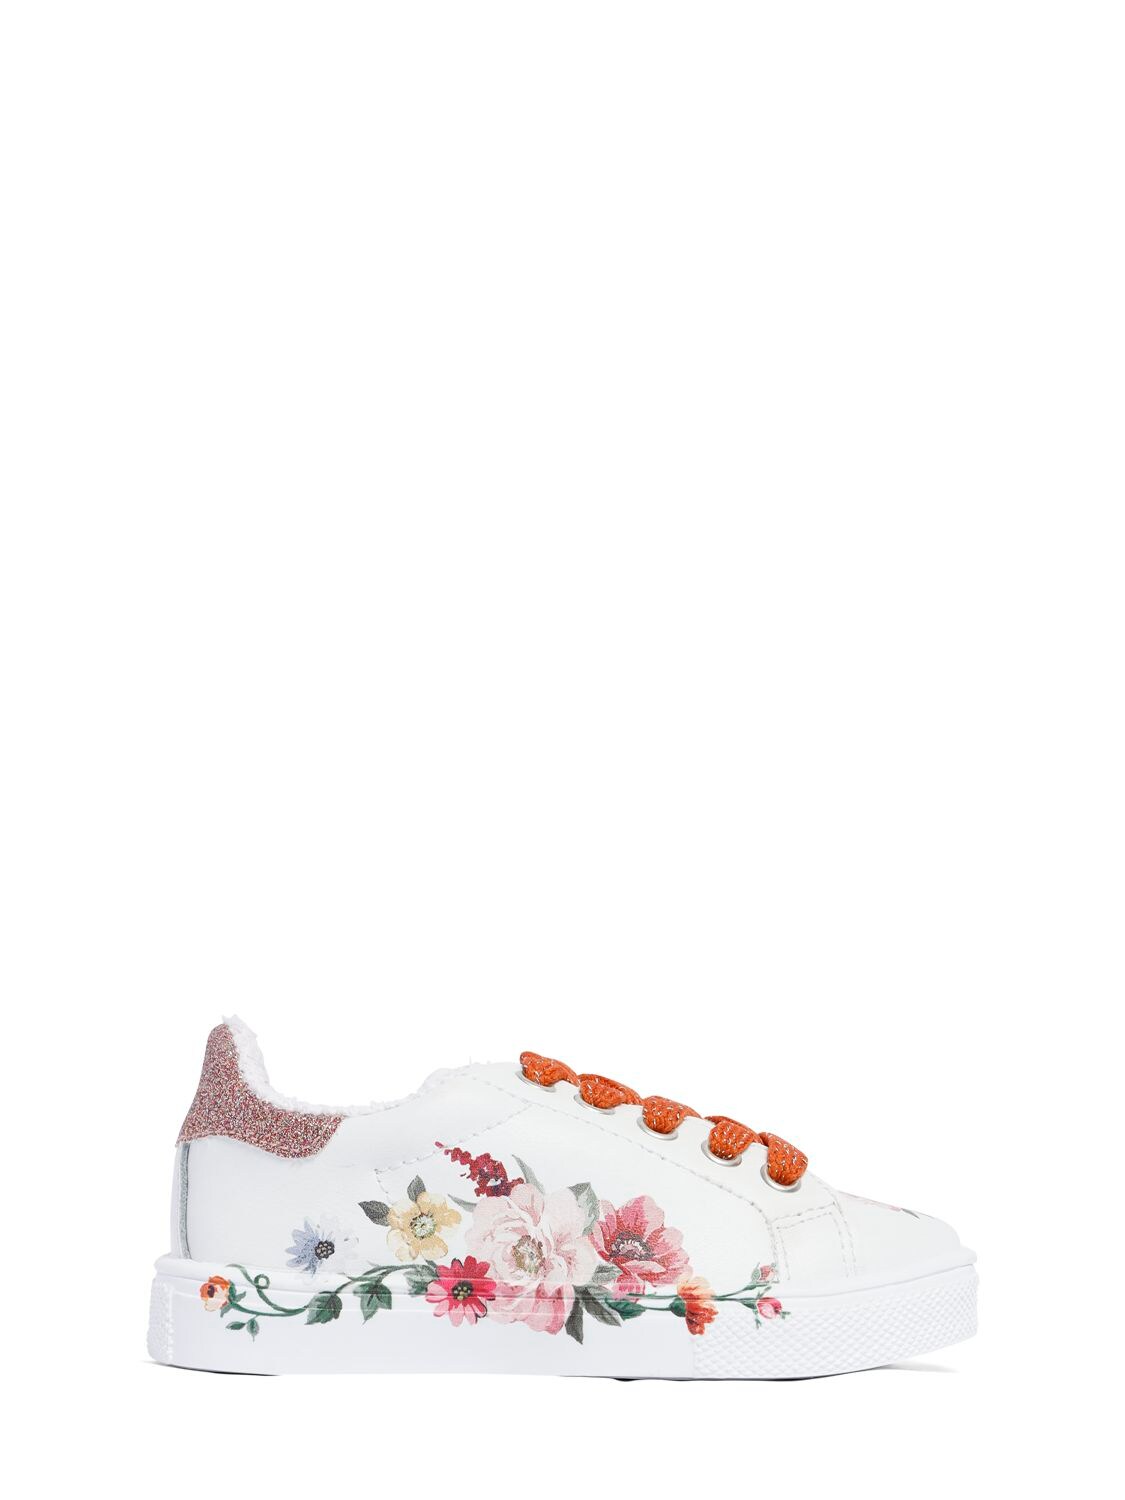 MONNALISA ROSE PRINT LEATHER LACE-UP trainers